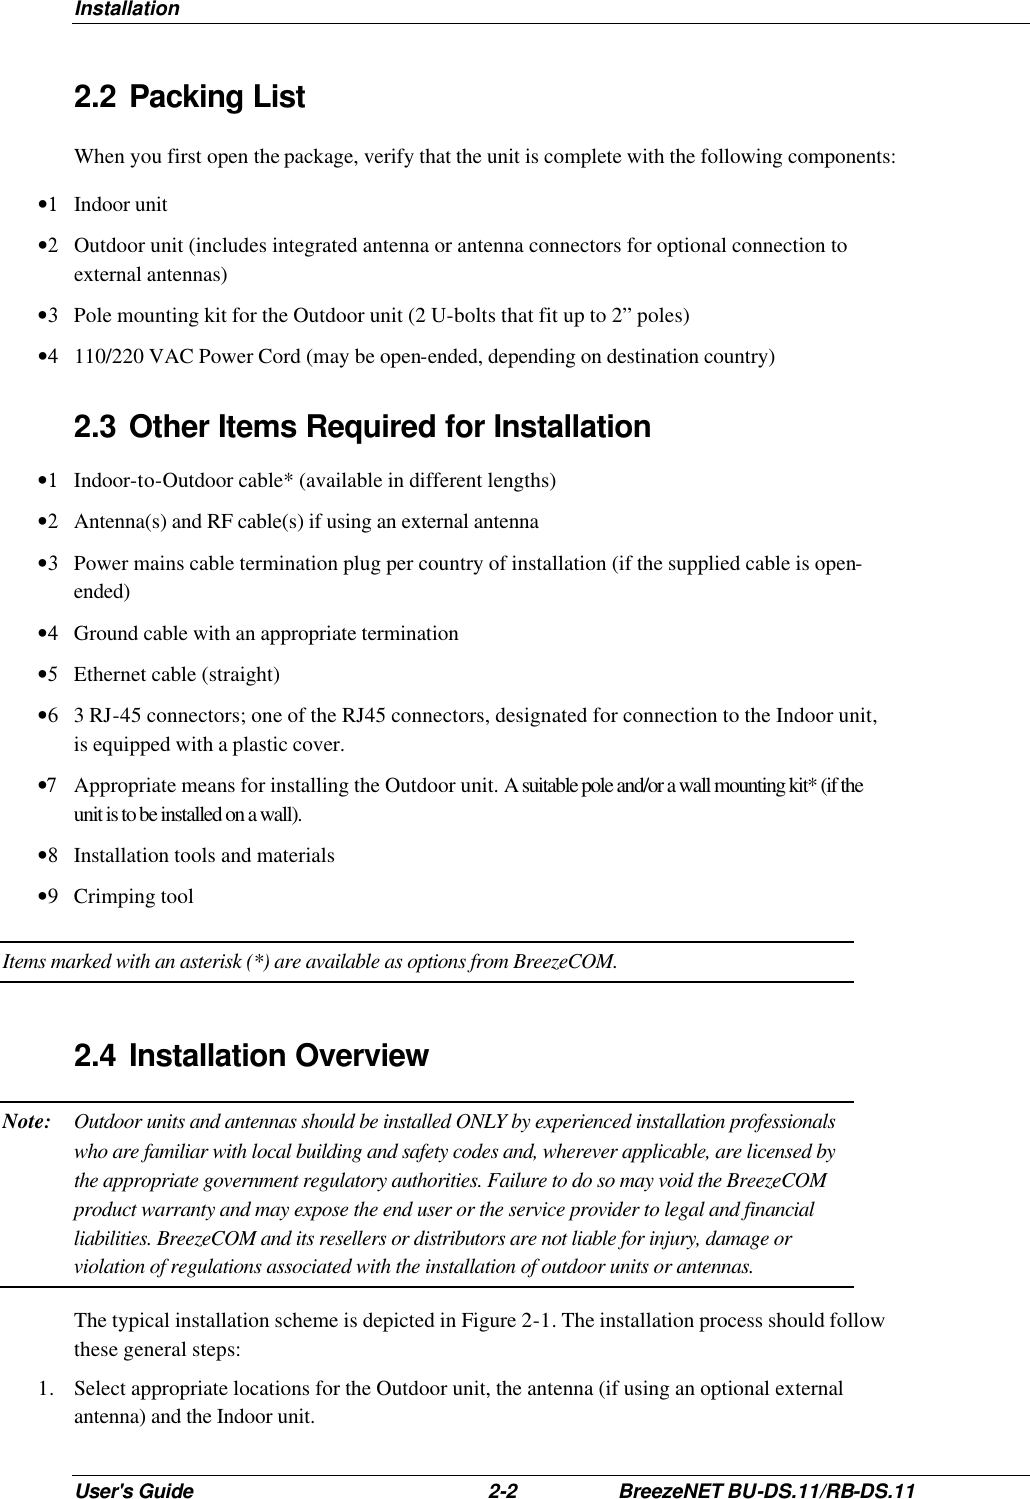 Installation User&apos;s Guide 2-2 BreezeNET BU-DS.11/RB-DS.11 2.2 Packing List When you first open the package, verify that the unit is complete with the following components: •1 Indoor unit •2 Outdoor unit (includes integrated antenna or antenna connectors for optional connection to external antennas) •3 Pole mounting kit for the Outdoor unit (2 U-bolts that fit up to 2” poles) •4 110/220 VAC Power Cord (may be open-ended, depending on destination country) 2.3 Other Items Required for Installation  •1 Indoor-to-Outdoor cable* (available in different lengths) •2 Antenna(s) and RF cable(s) if using an external antenna •3 Power mains cable termination plug per country of installation (if the supplied cable is open-ended) •4 Ground cable with an appropriate termination •5 Ethernet cable (straight) •6 3 RJ-45 connectors; one of the RJ45 connectors, designated for connection to the Indoor unit, is equipped with a plastic cover. •7 Appropriate means for installing the Outdoor unit. A suitable pole and/or a wall mounting kit* (if the unit is to be installed on a wall). •8 Installation tools and materials •9 Crimping tool Items marked with an asterisk (*) are available as options from BreezeCOM. 2.4 Installation Overview Note: Outdoor units and antennas should be installed ONLY by experienced installation professionals who are familiar with local building and safety codes and, wherever applicable, are licensed by the appropriate government regulatory authorities. Failure to do so may void the BreezeCOM product warranty and may expose the end user or the service provider to legal and financial liabilities. BreezeCOM and its resellers or distributors are not liable for injury, damage or violation of regulations associated with the installation of outdoor units or antennas. The typical installation scheme is depicted in Figure 2-1. The installation process should follow these general steps: 1. Select appropriate locations for the Outdoor unit, the antenna (if using an optional external antenna) and the Indoor unit. 